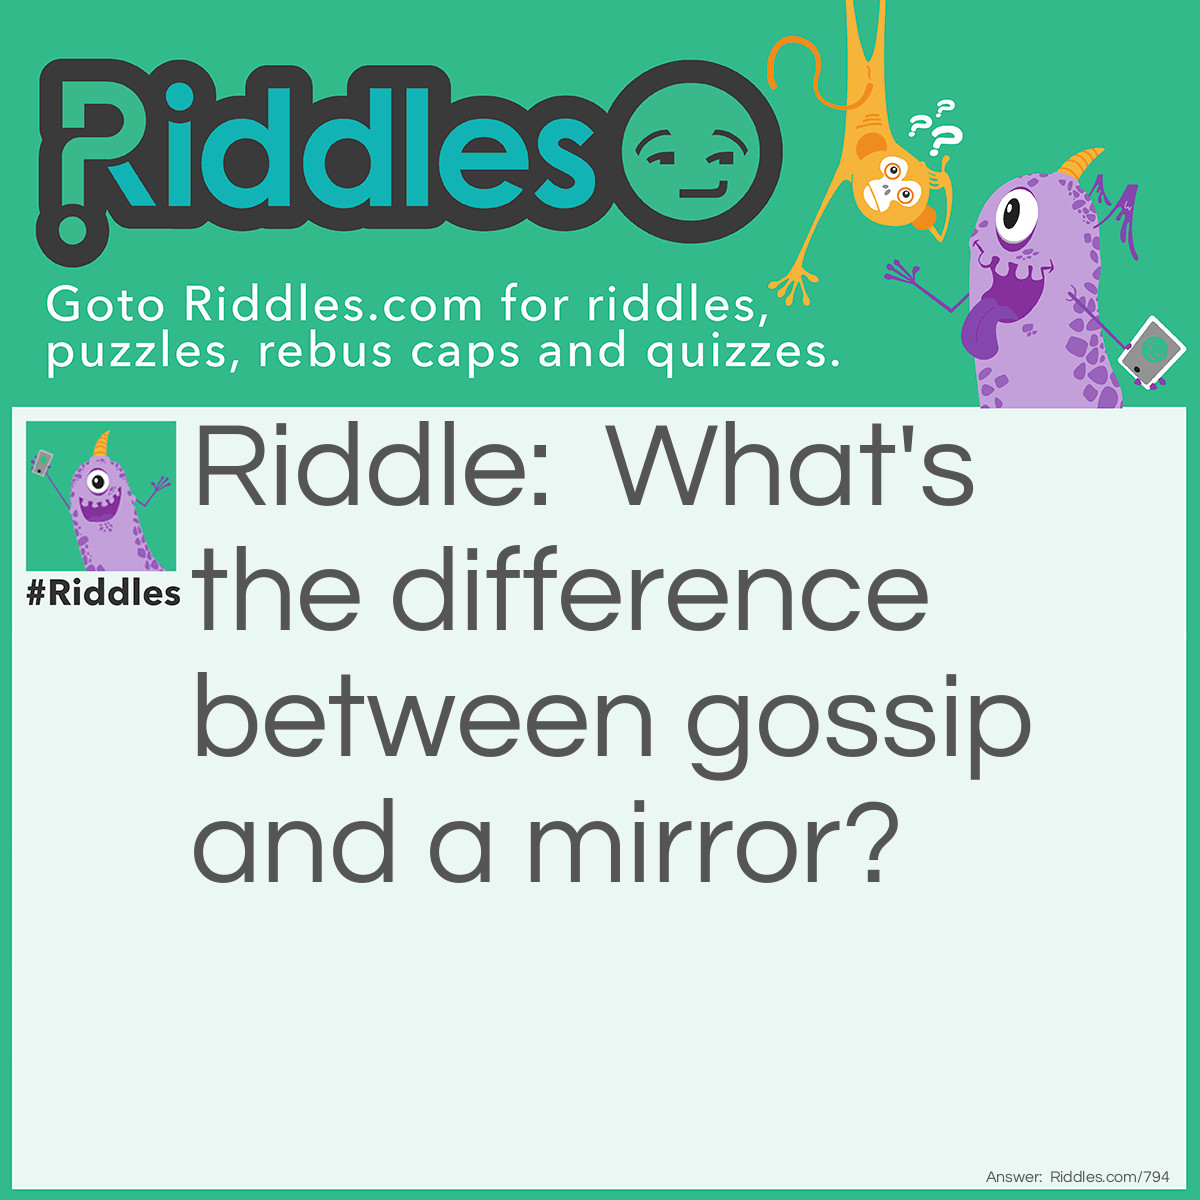 Riddle: What's the difference between gossip and a mirror? Answer: One speaks without reflecting and the other reflects without speaking.